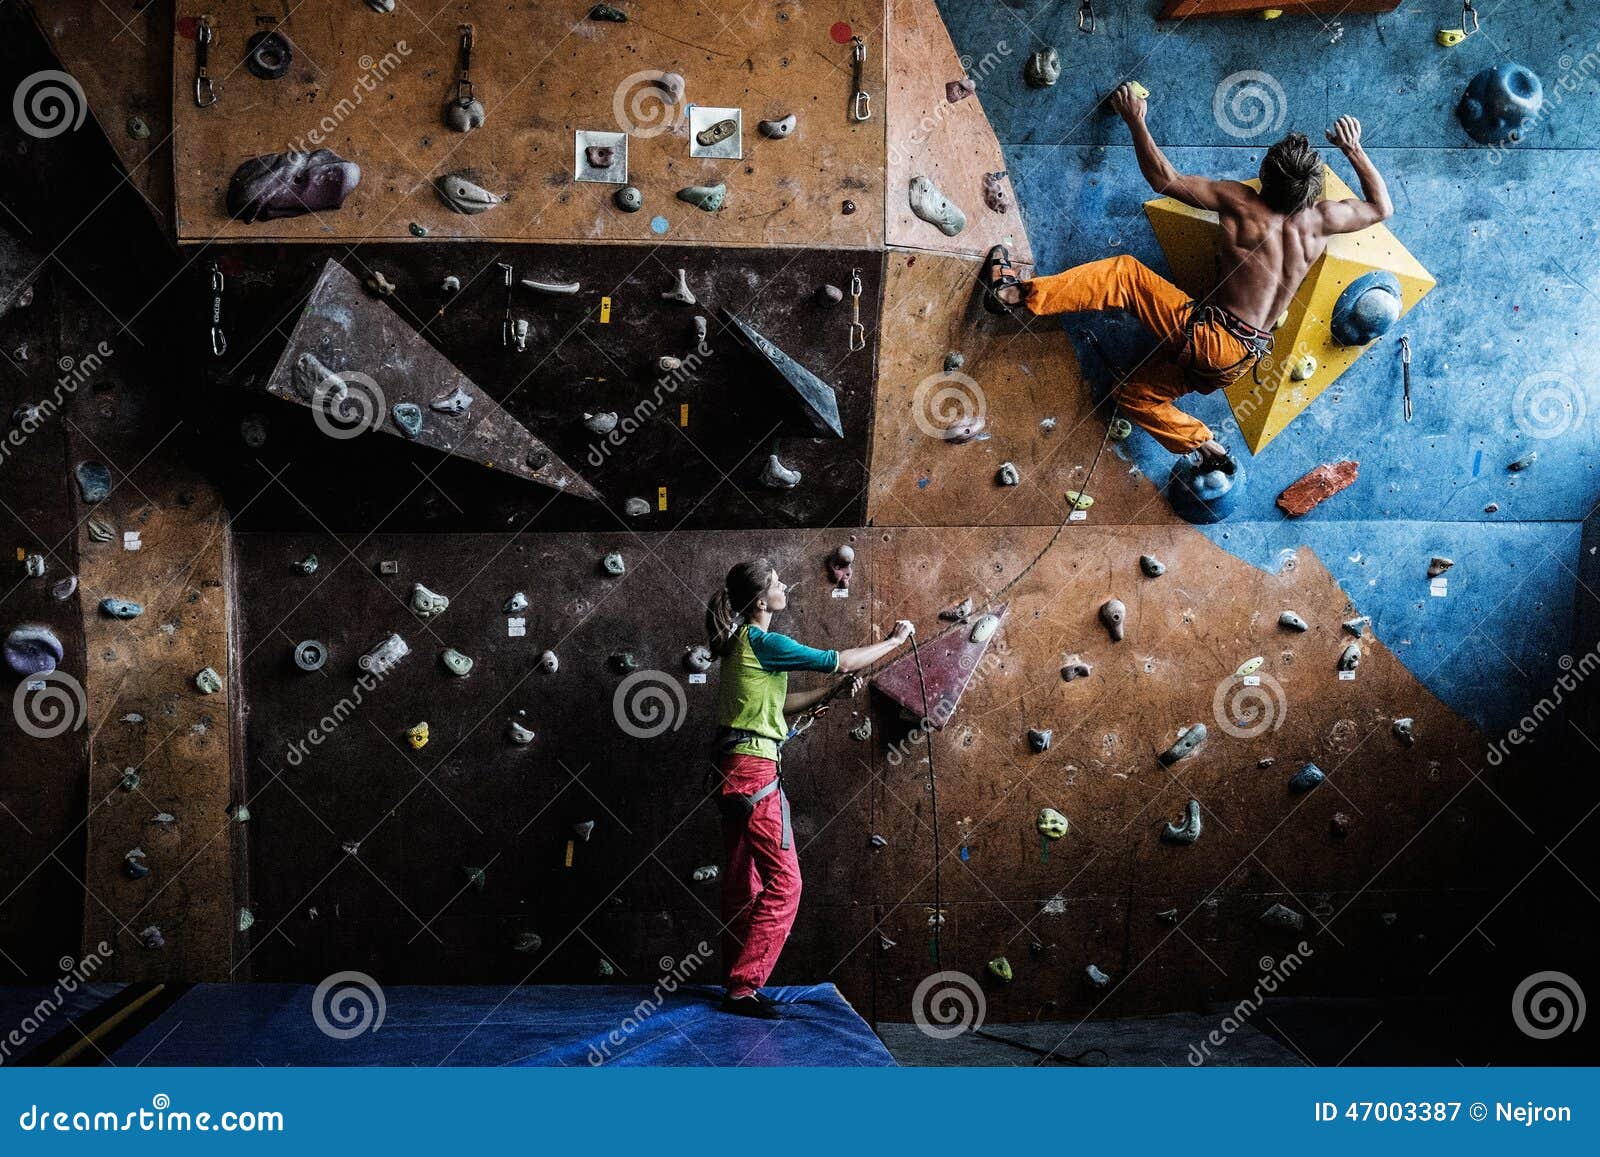 couple practicing rock-climbing on a rock wall